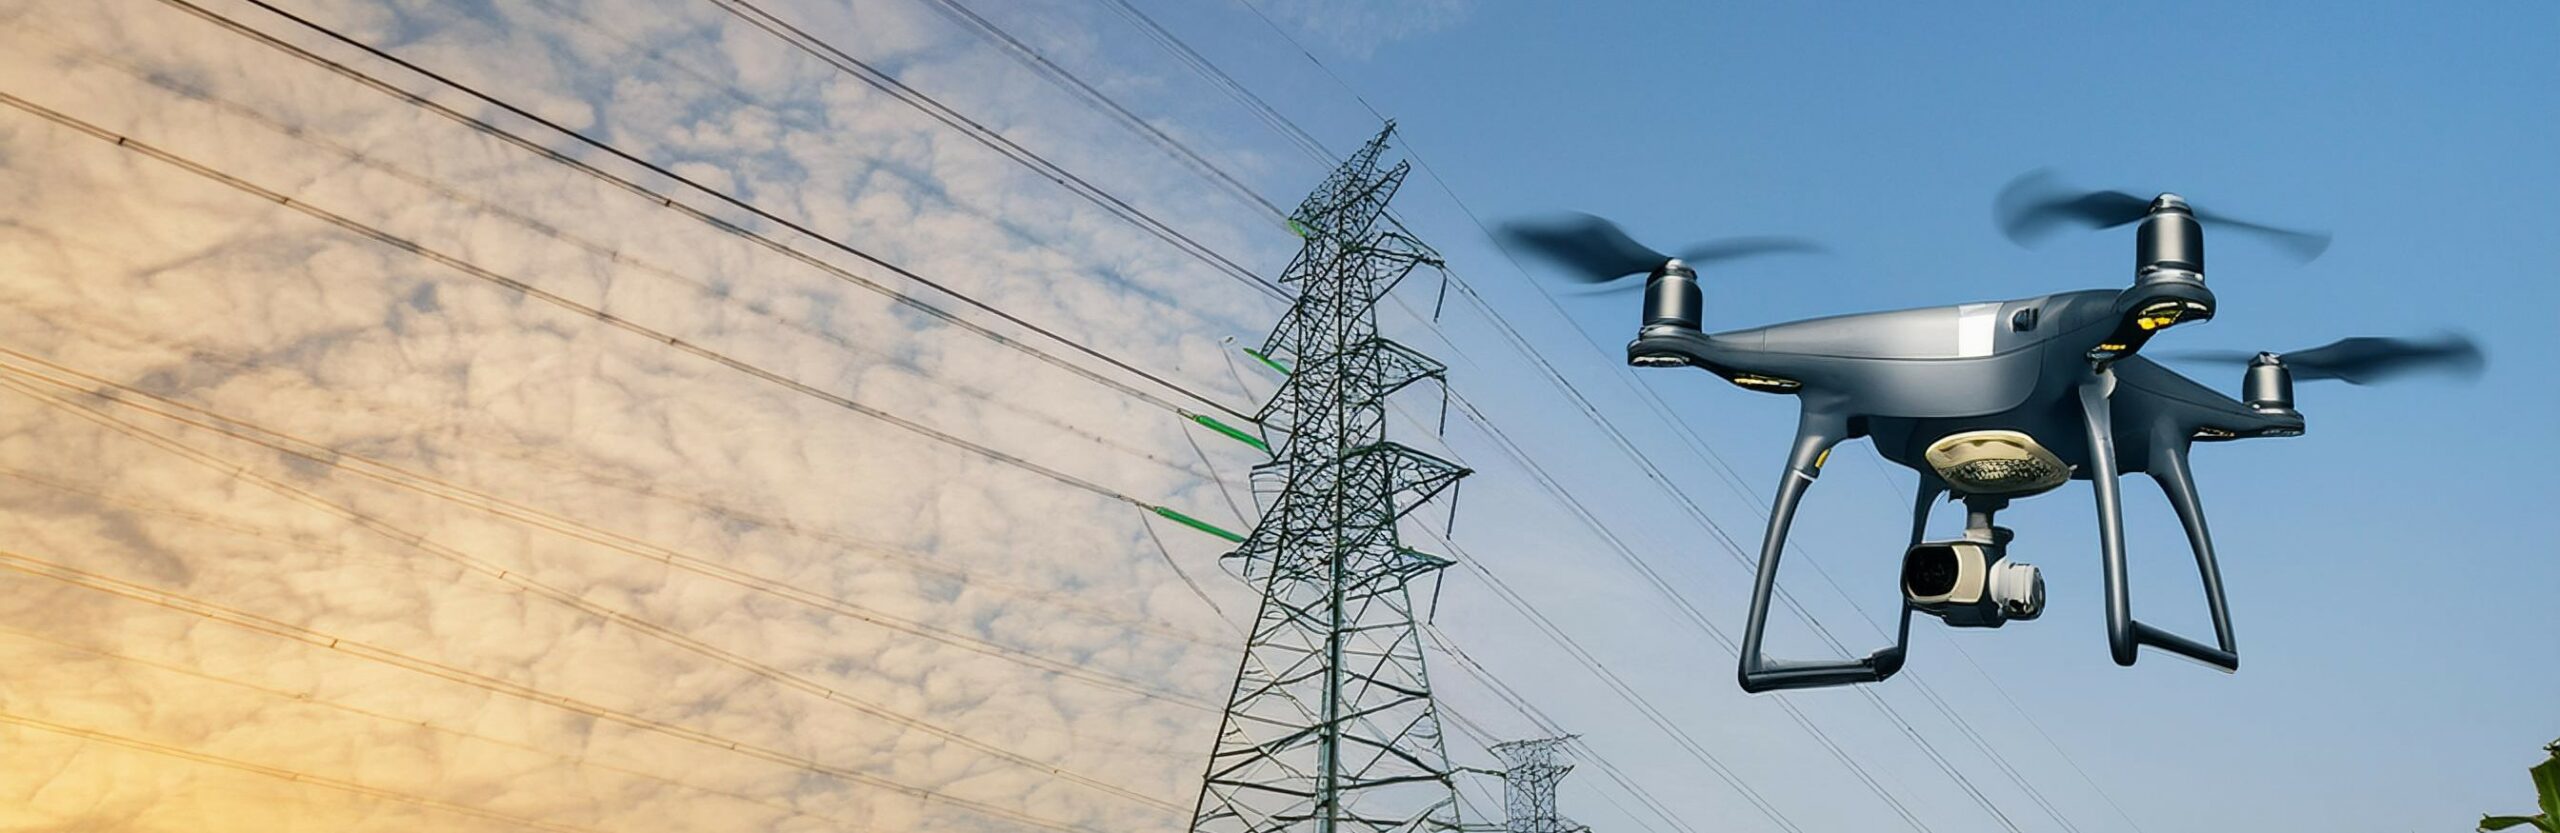 drone capturing images of utility power lines